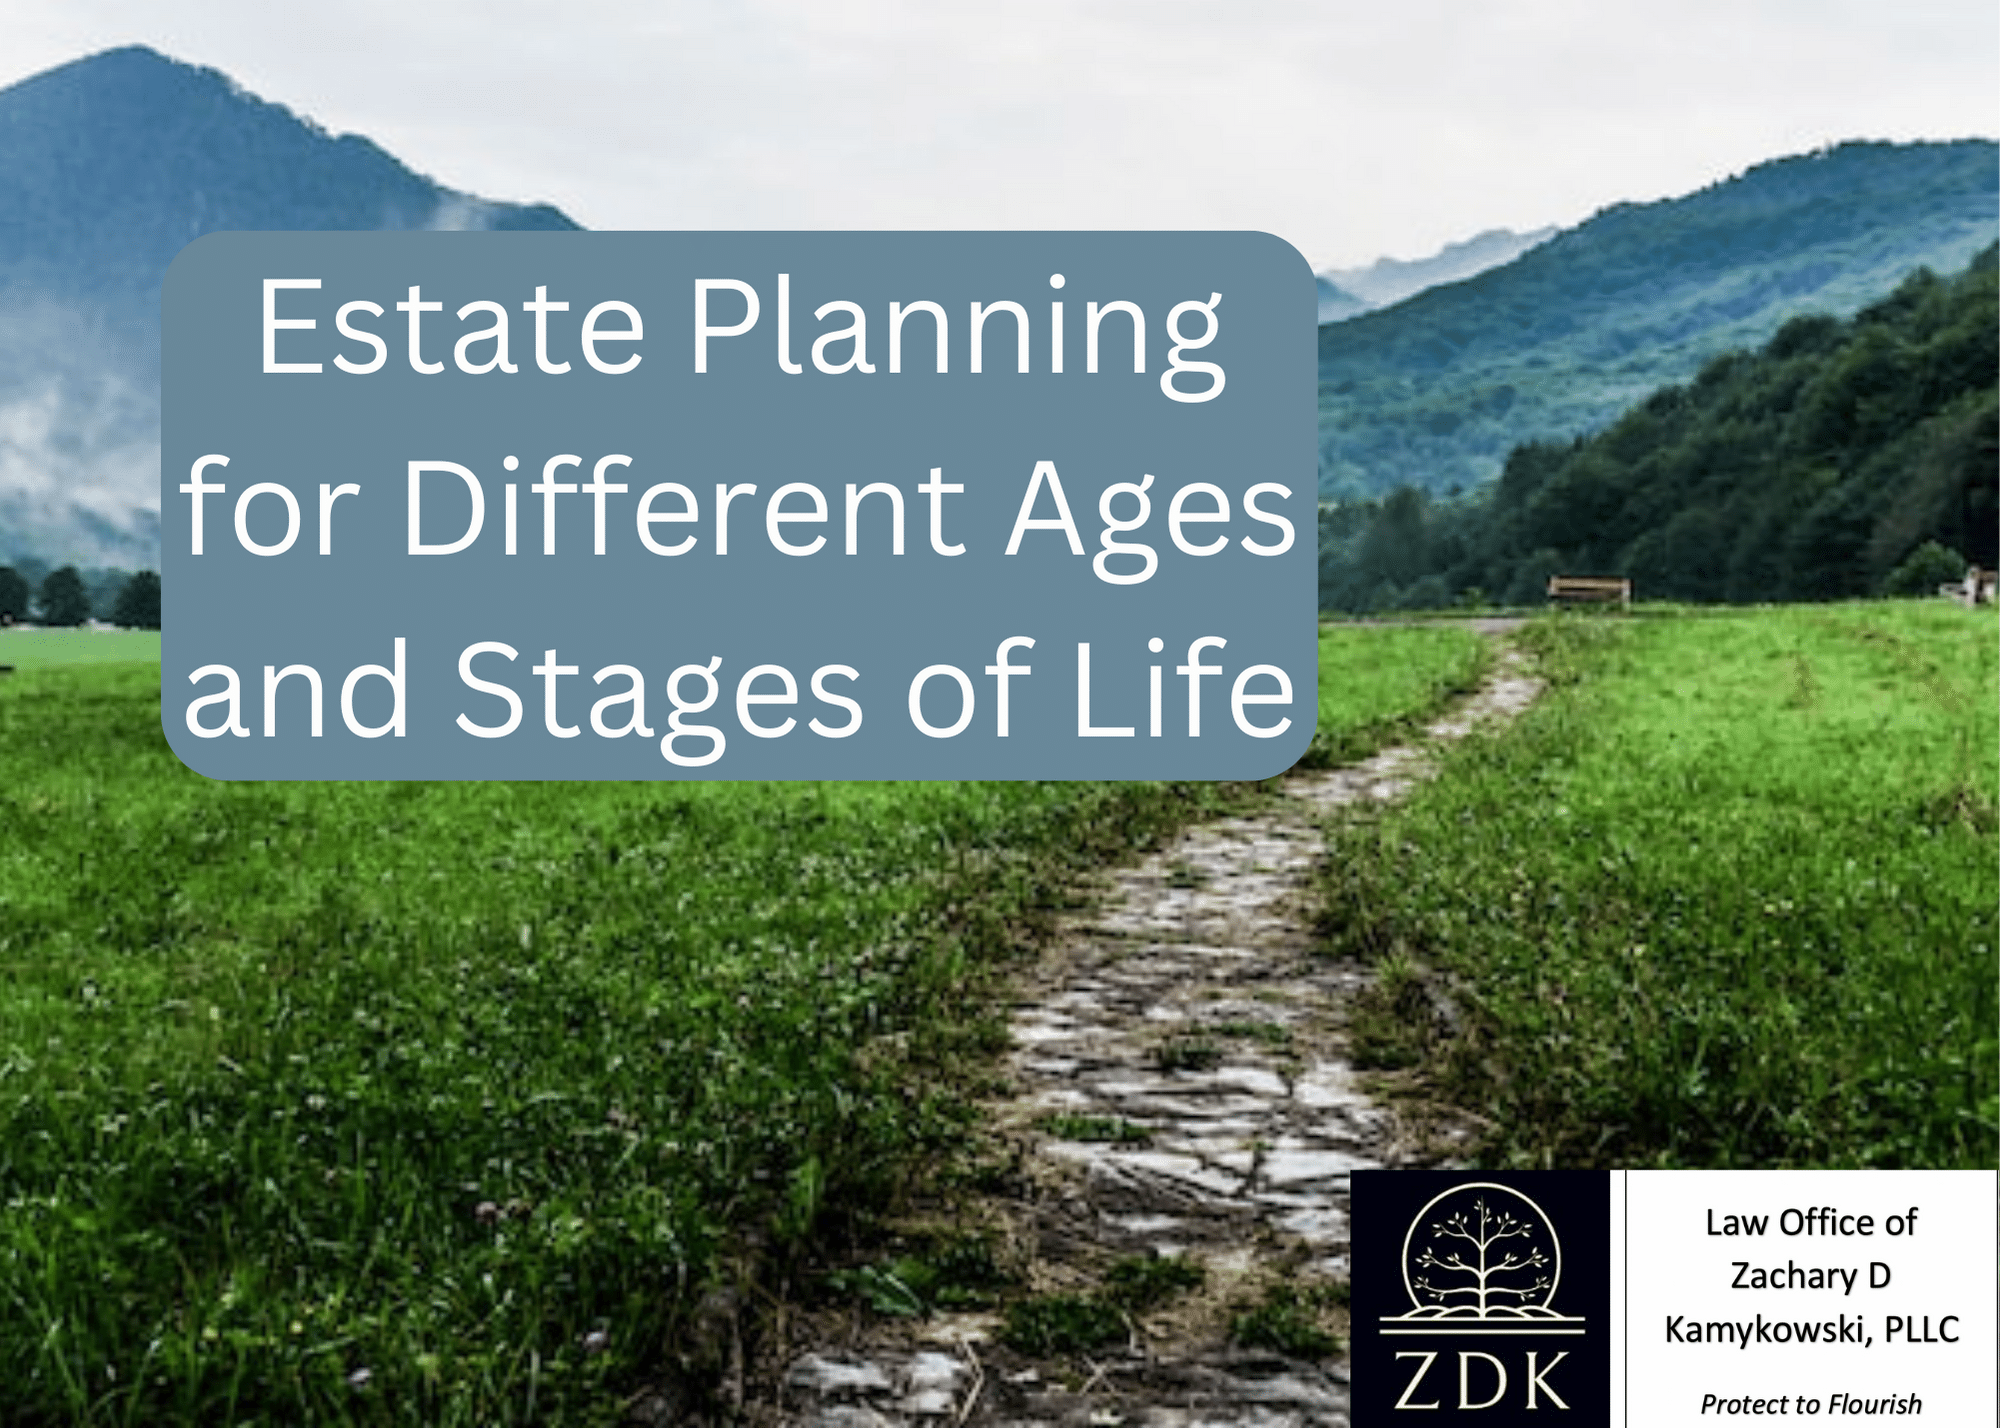 Estate Planning for Different Ages and Stages of Life